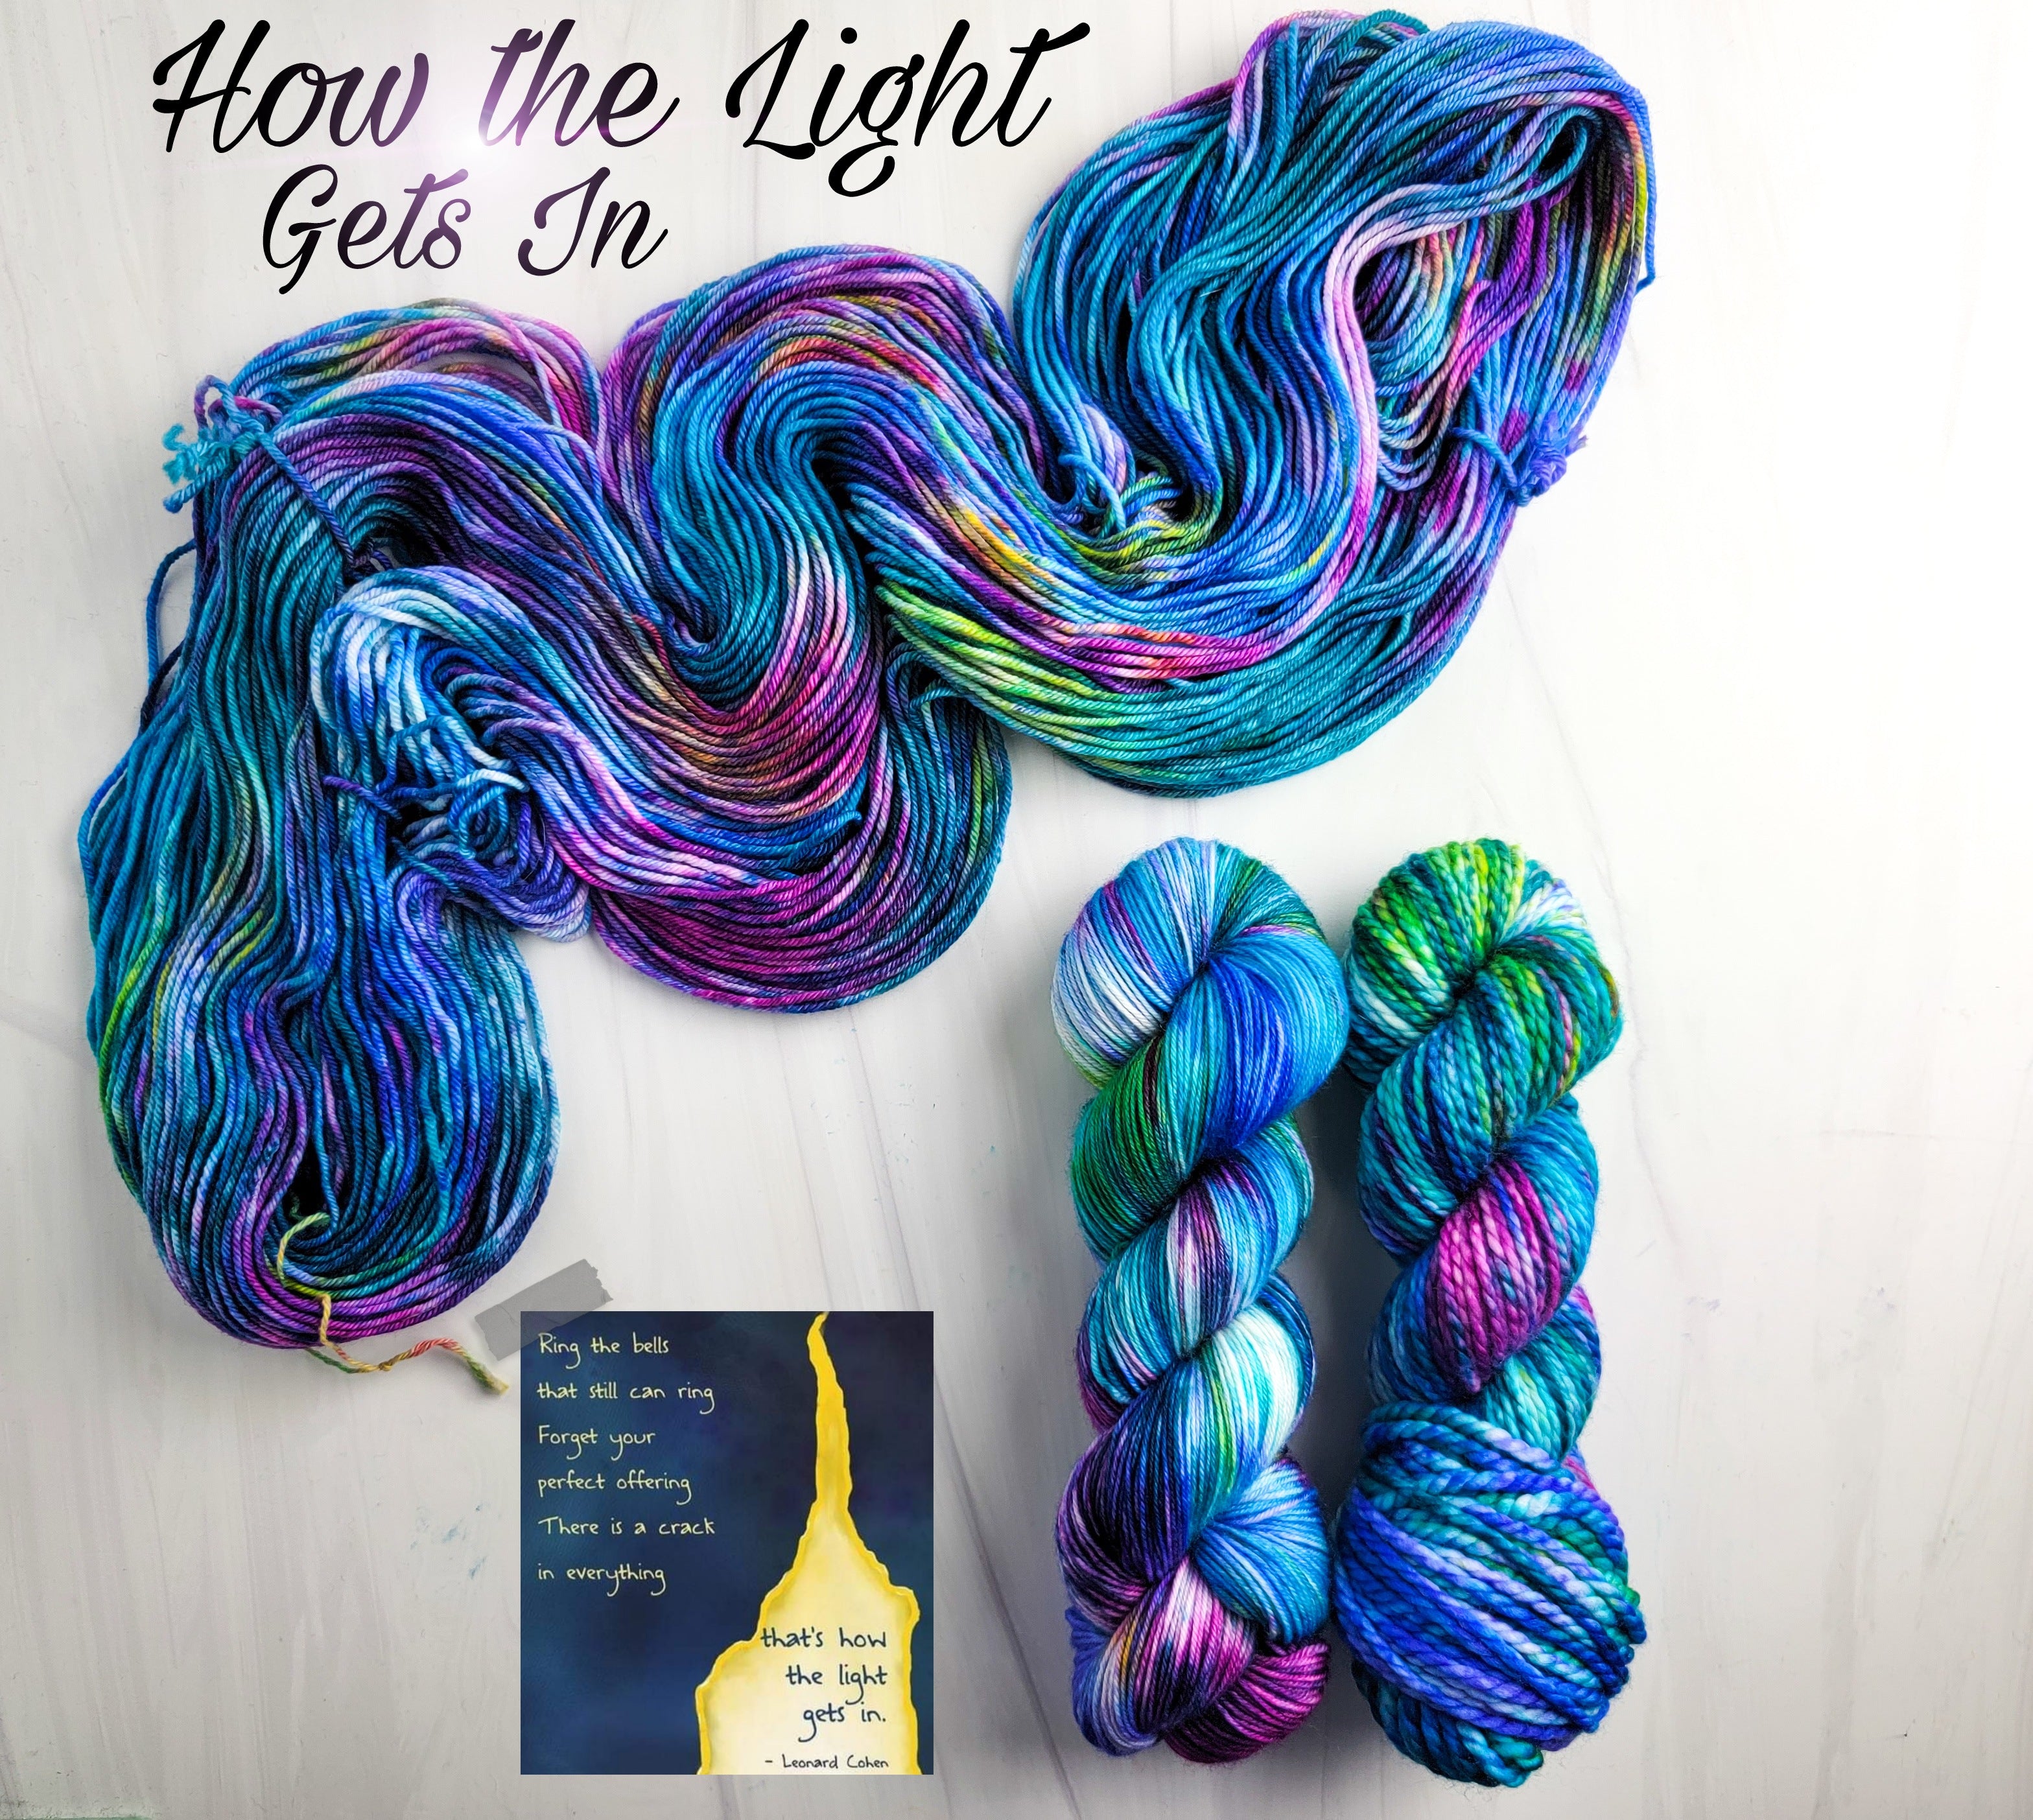 How the Light Gets In - Hand dyed Variegated yarn - Fingering to bulky